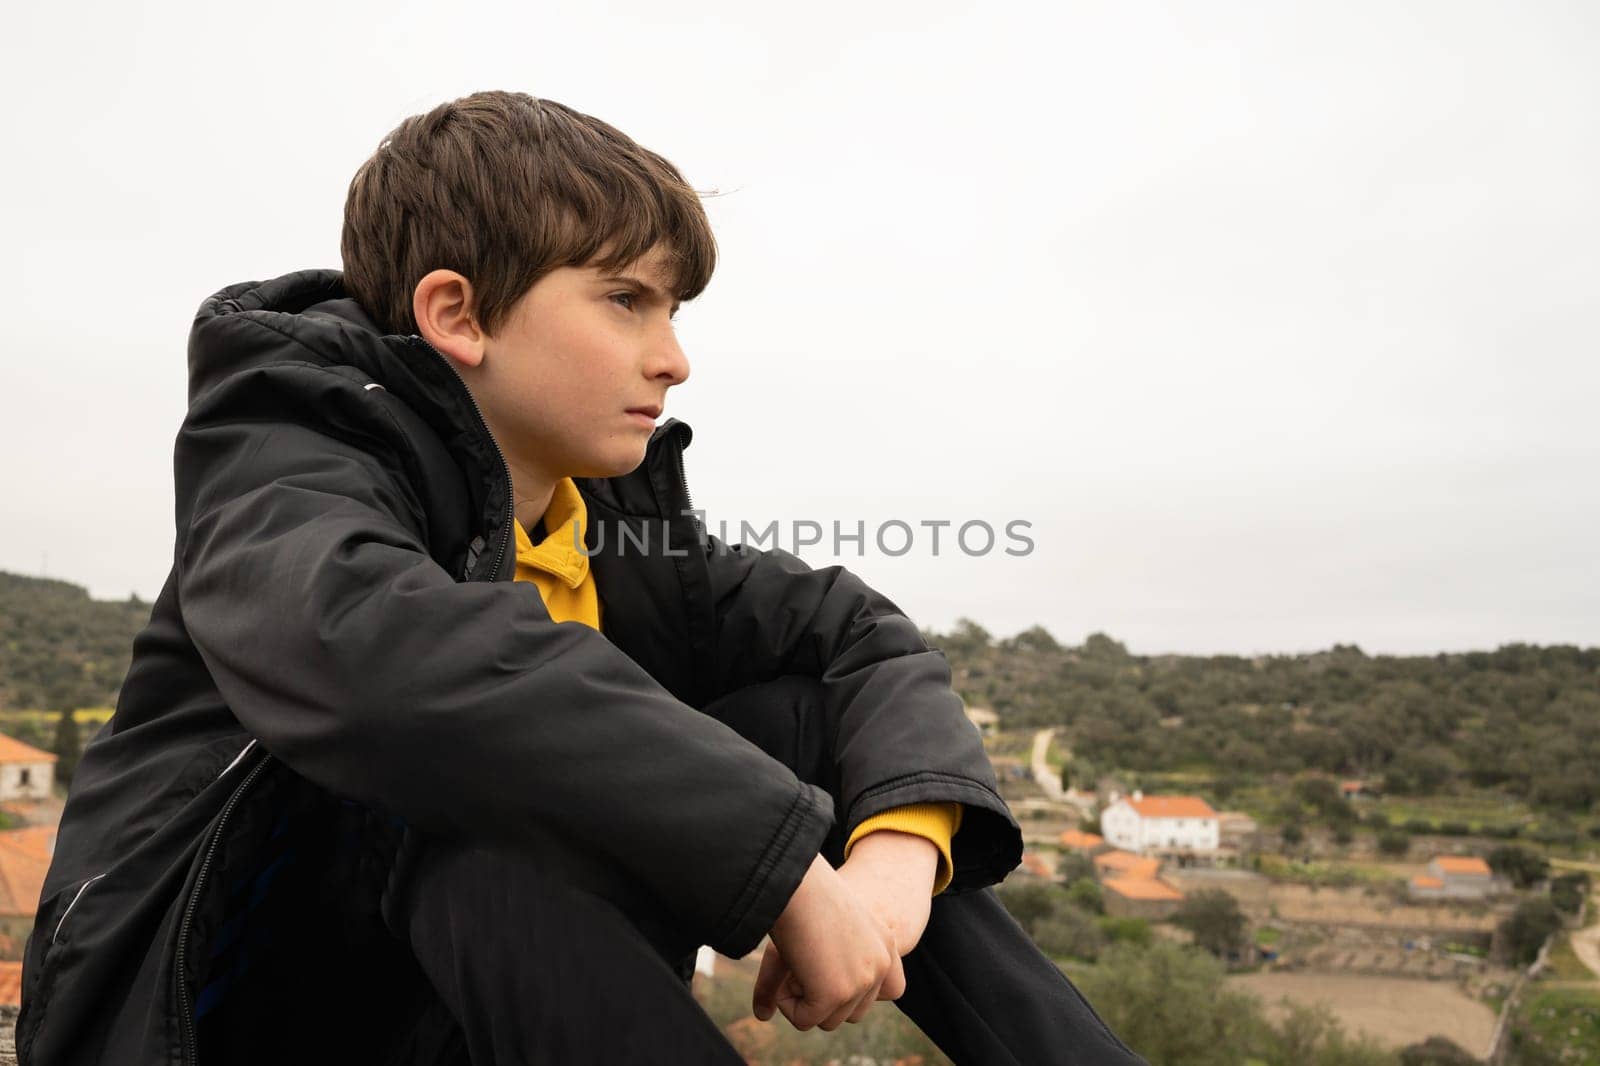 Profile of a serious young boy contemplating sitting in the mountain near a town.